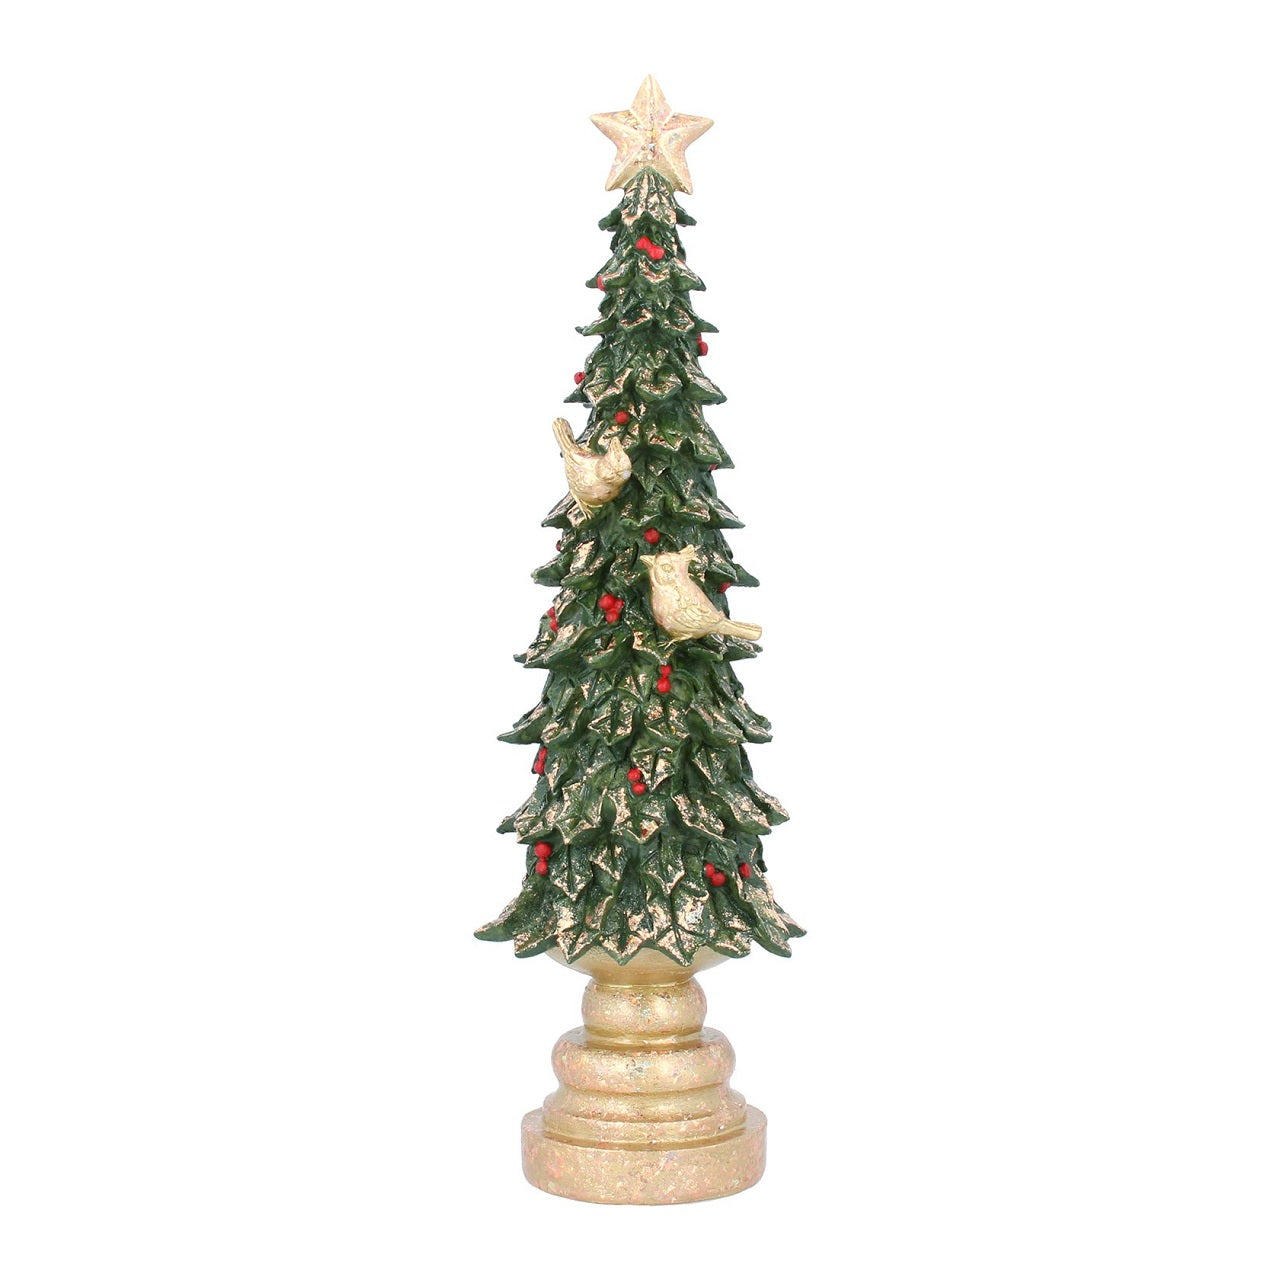 Gisela Graham Nostalgic Christmas Tree on Gold Plinth  Browse our beautiful range of luxury Christmas tree decorations and ornaments for your tree this Christmas.  Add some style to your home this Christmas with this glittering gold tipped nostalgic Christmas tree on a gold plinth.